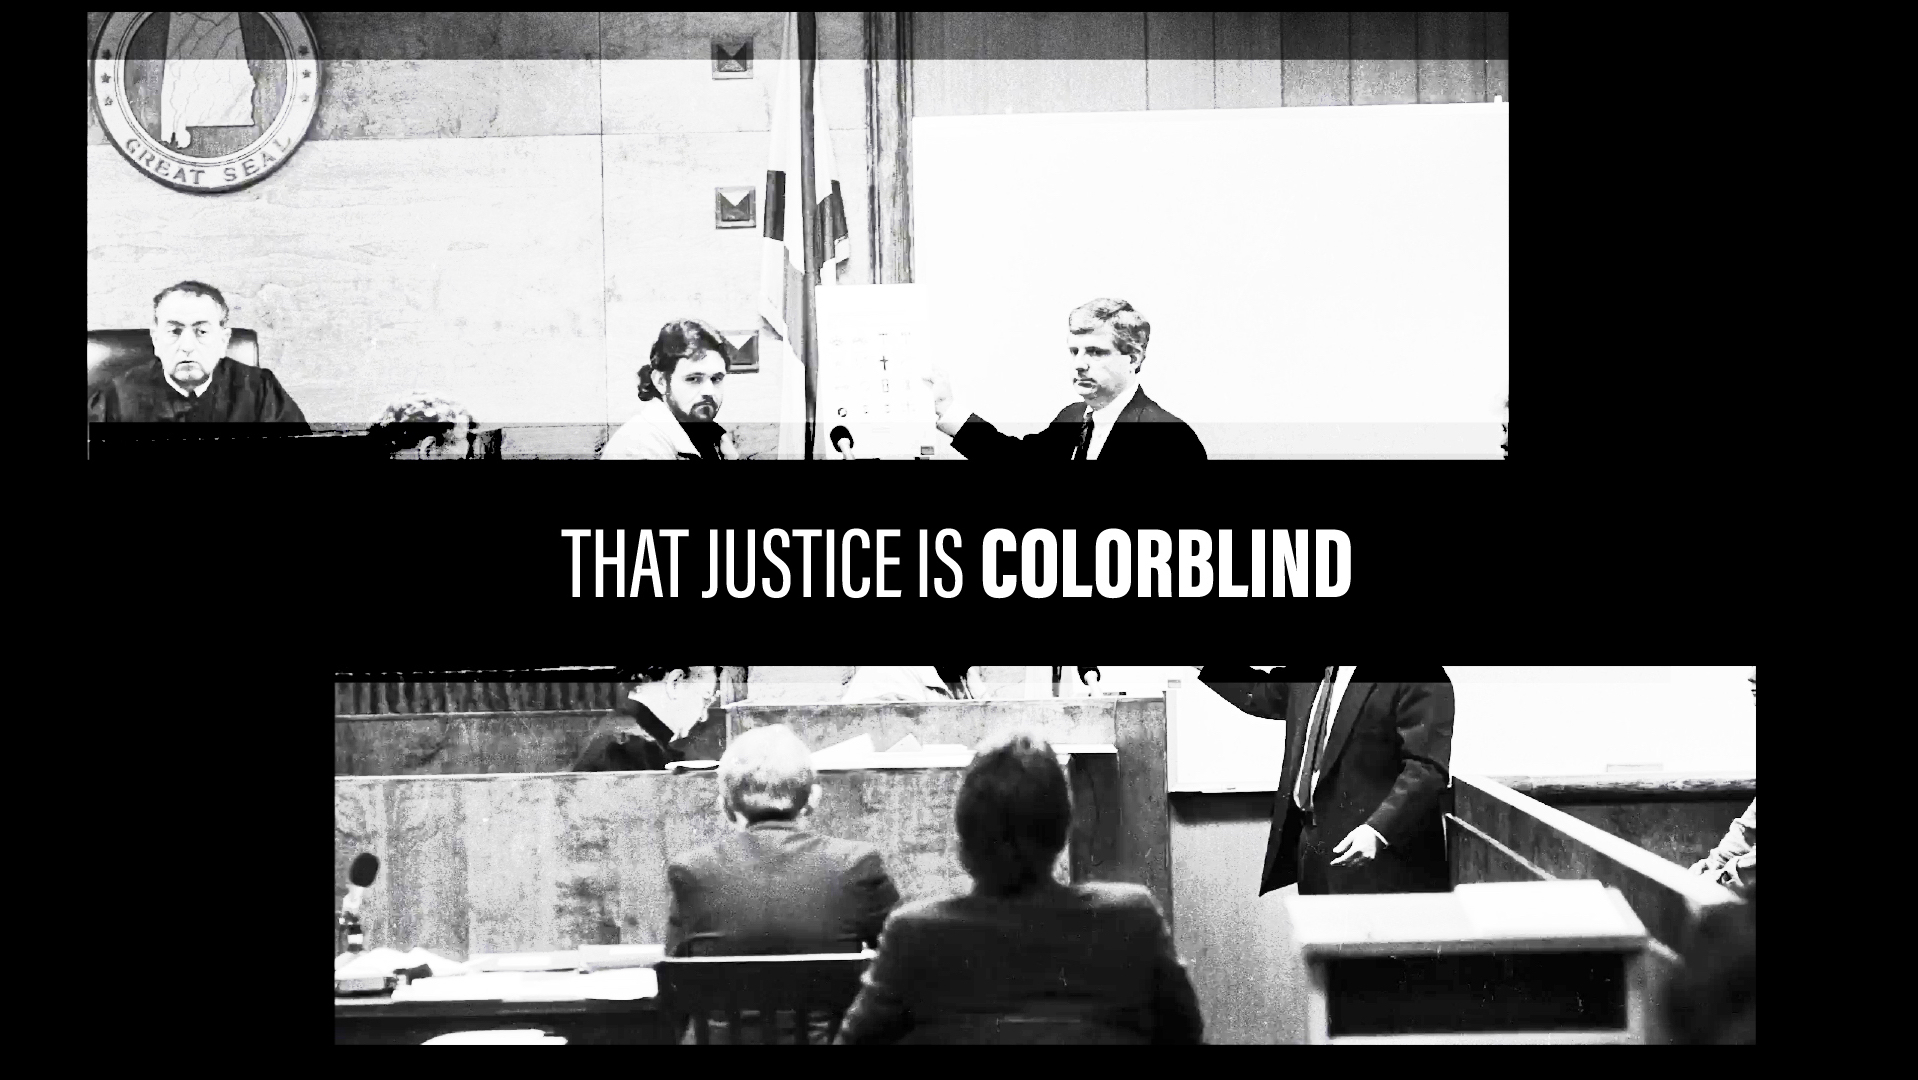 black and white images with text "that justice is colorblind"